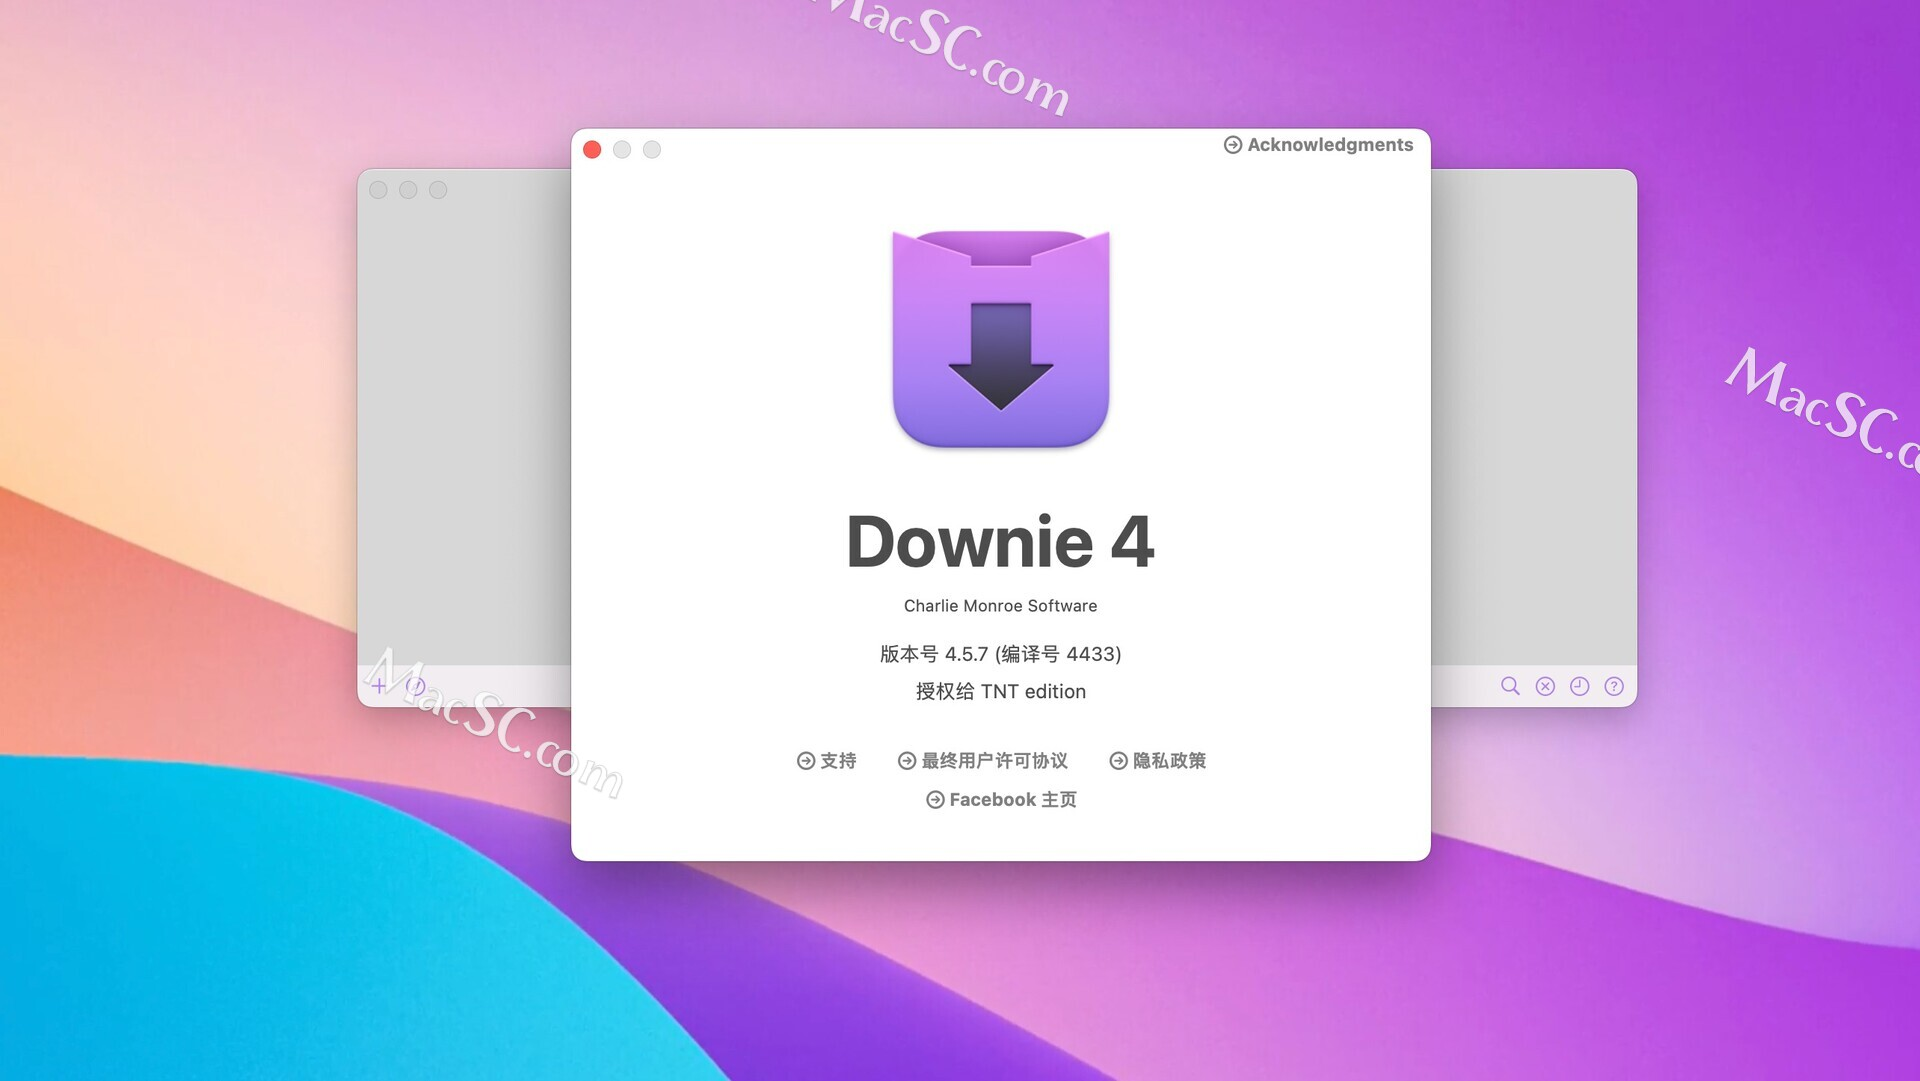 download the new version Downie 4